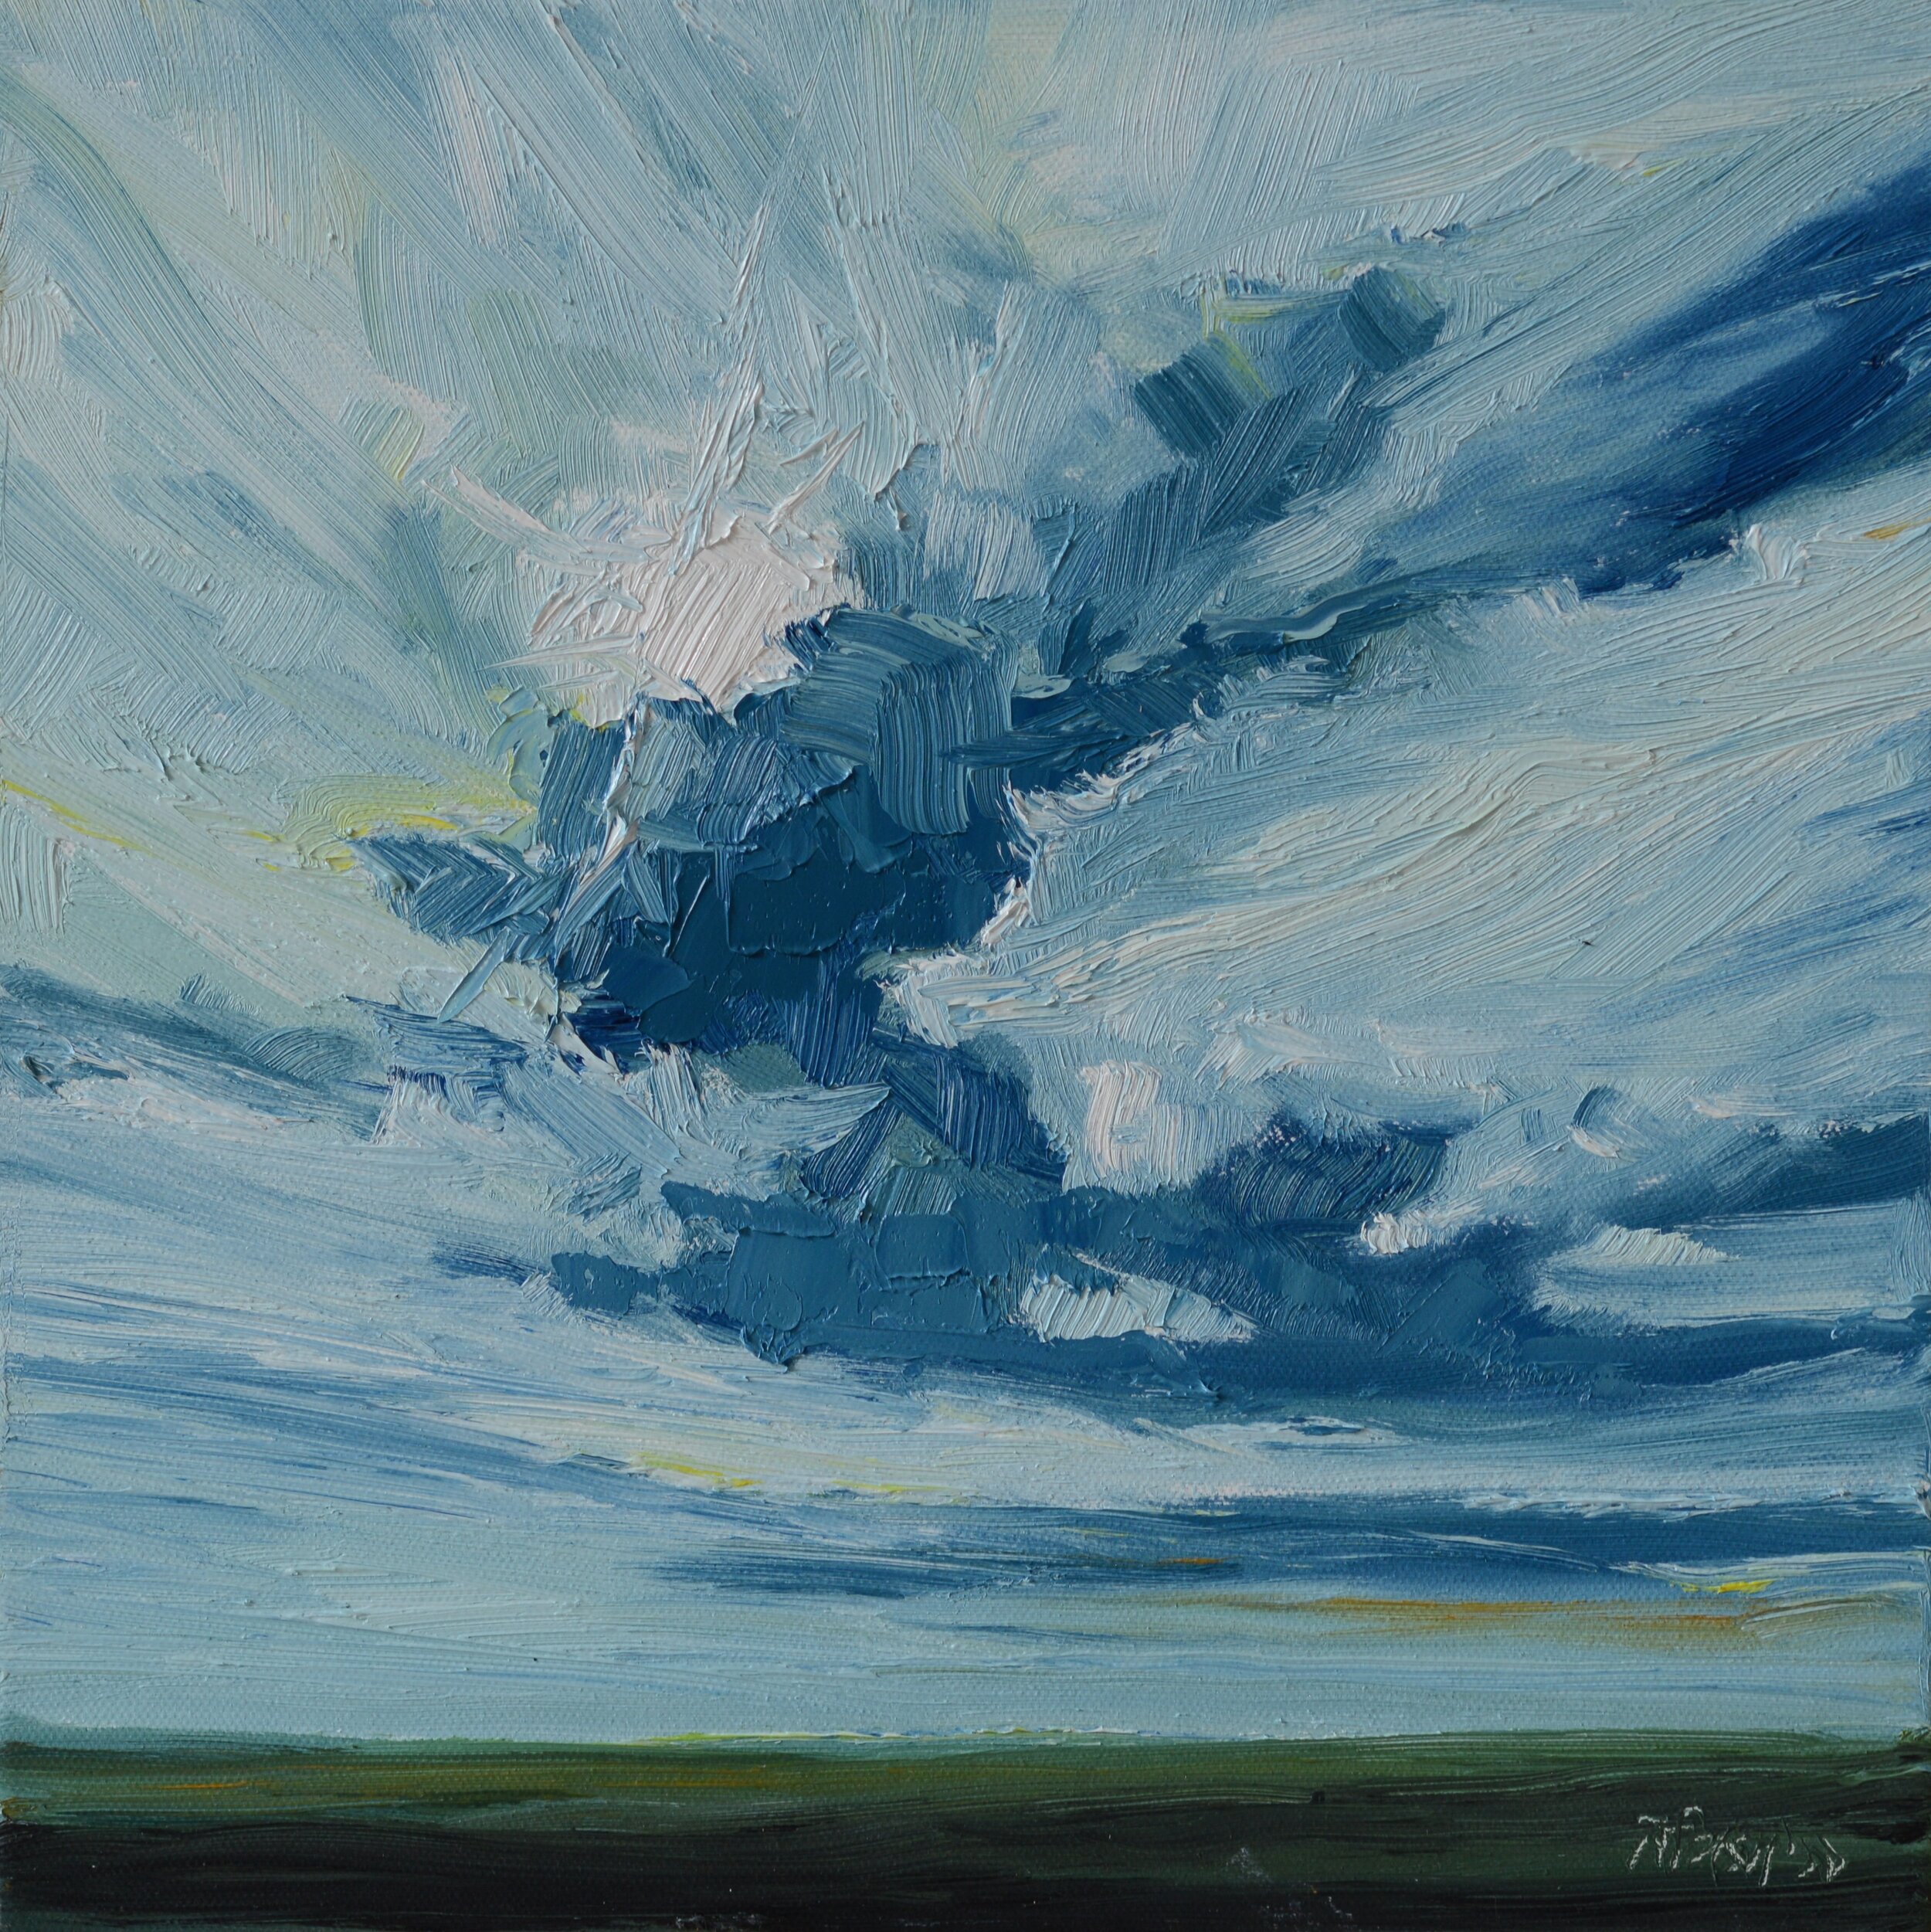  Oil on Canvas  30 x 30 cm  SOLD 